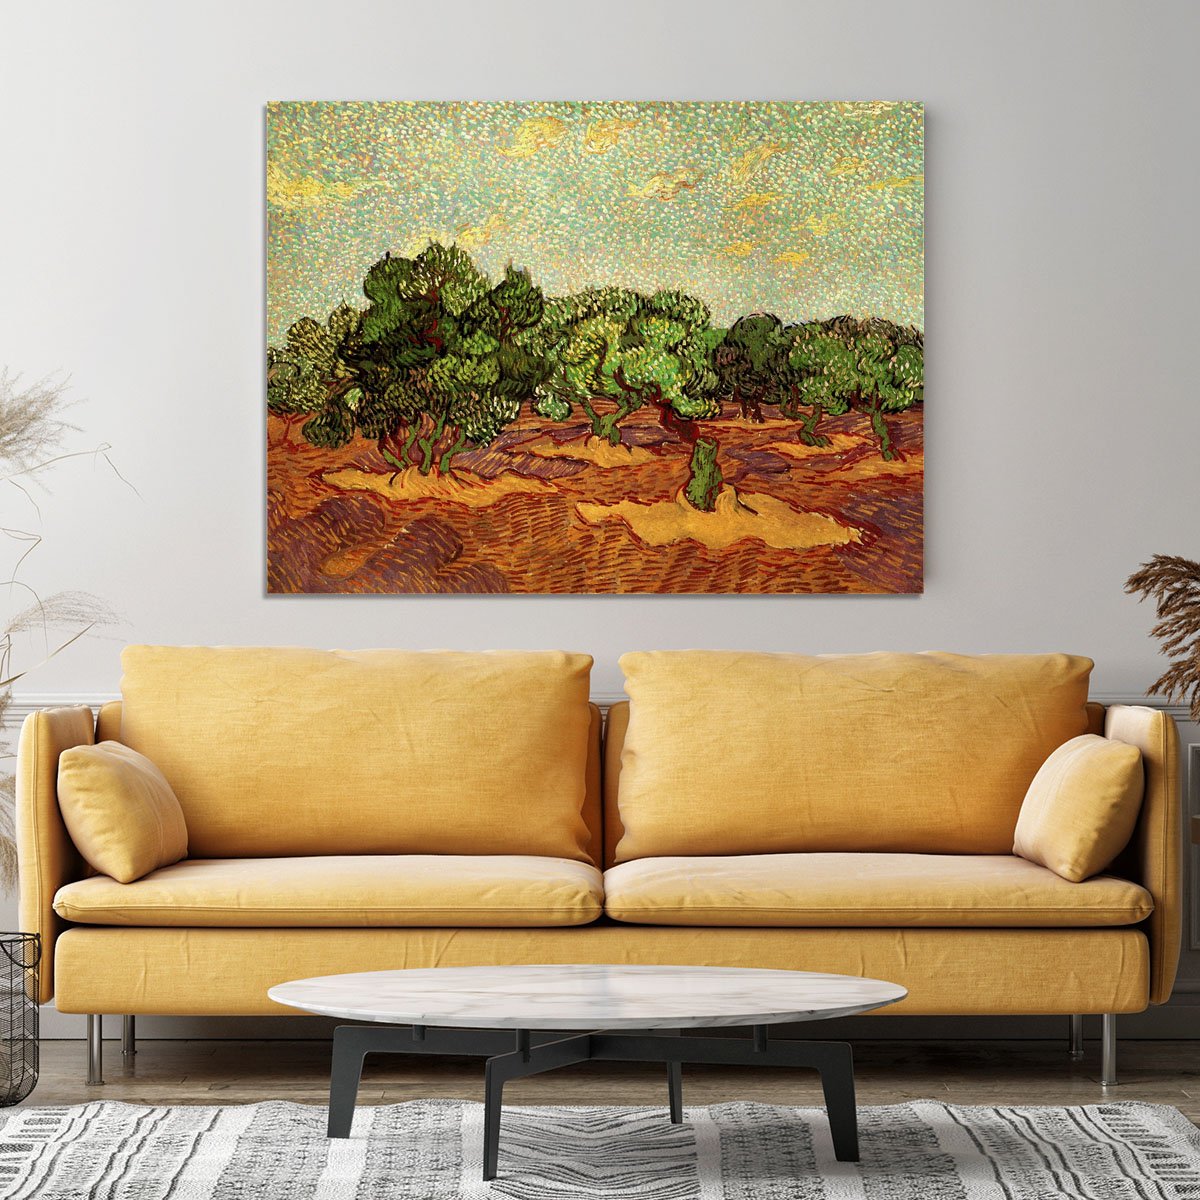 Olive Grove Pale Blue Sky by Van Gogh Canvas Print or Poster